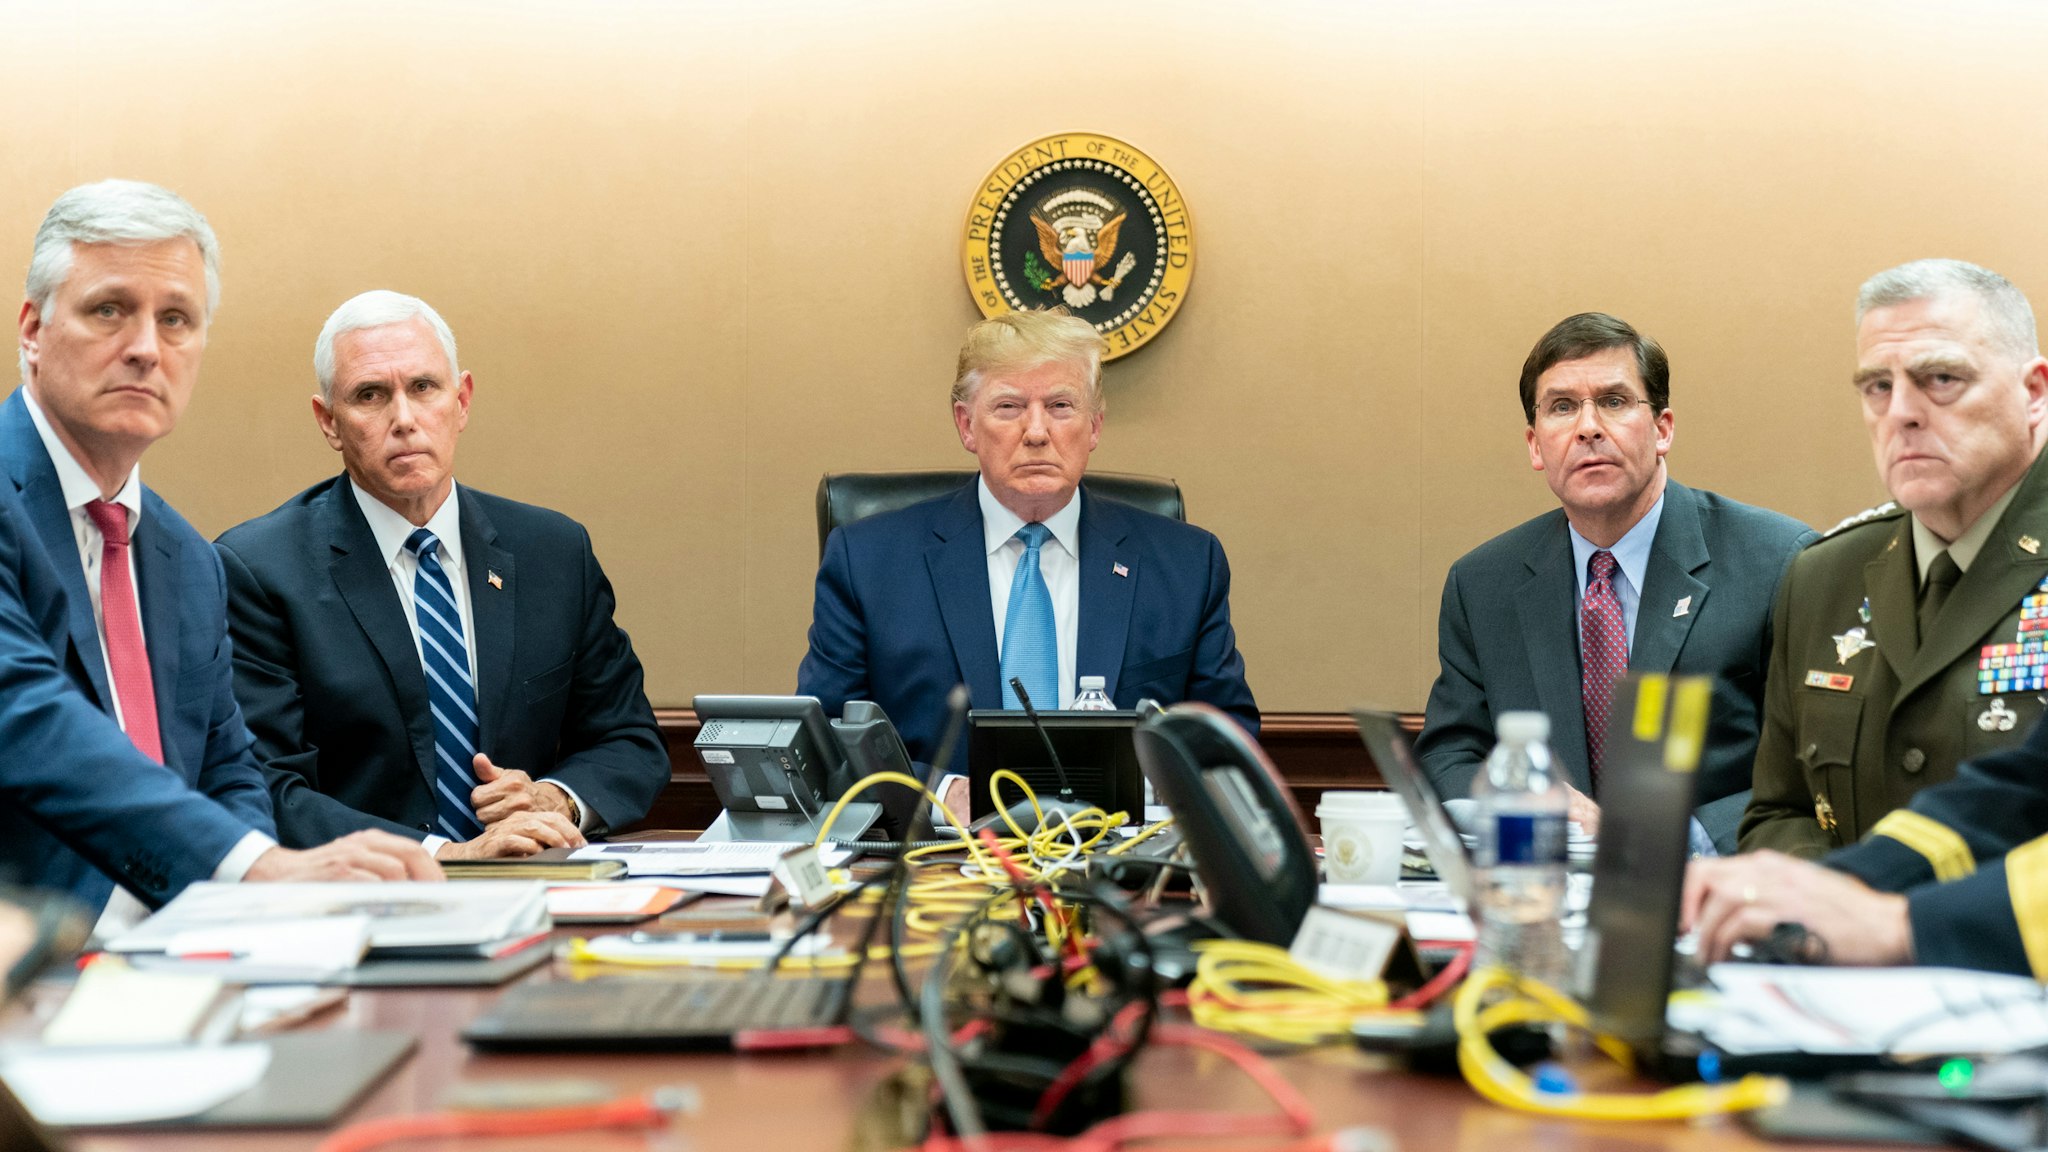 In this handout photo provided by the White House, President Donald J. Trump is joined by Vice President Mike Pence (2nd L), National Security Advisor Robert O’Brien (L), Secretary of Defense Mark Esper (2nd R) and Chairman of the Joint Chiefs of Staff U.S. Army General Mark A. Milley in the Situation Room of the White House October 26, 2019 in Washington, DC. The President was monitoring developments as U.S. Special Operations forces close in on ISIS leader Abu Bakr al-Baghdadi’s compound in Syria with a mission to kill or capture the terrorist.